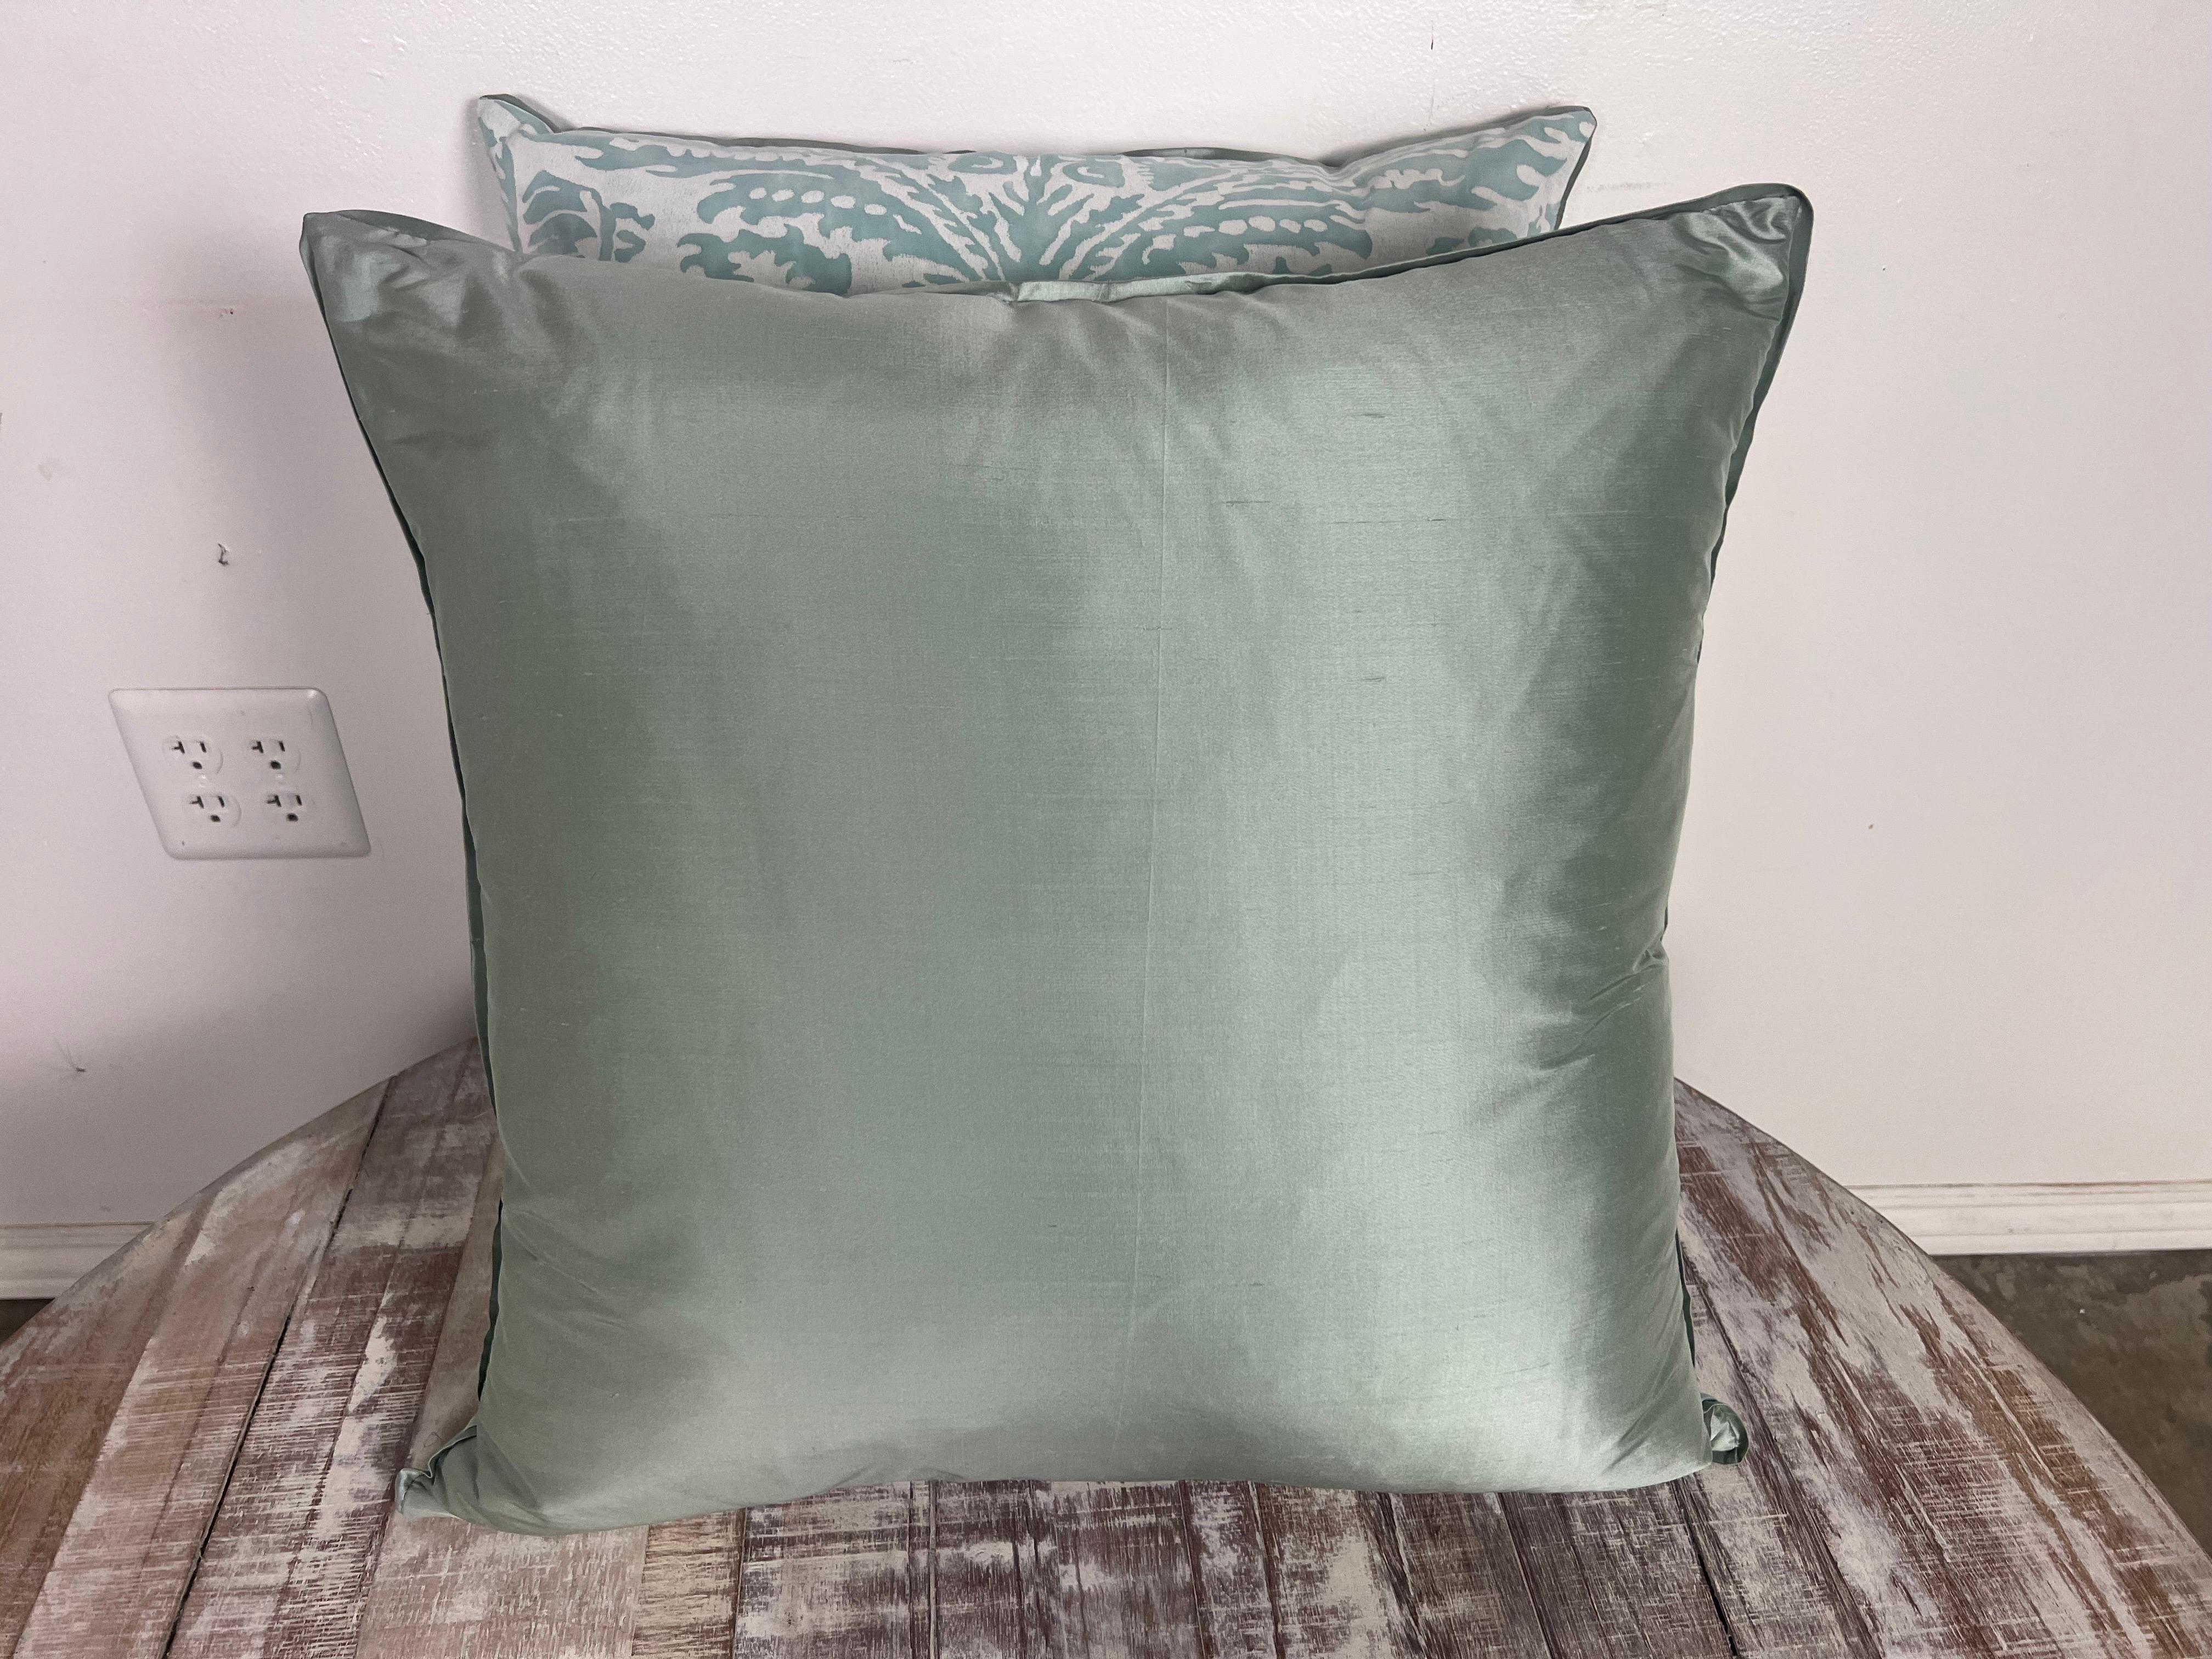 Pair of Aqua & White Colored Fortuny Pillows In Excellent Condition For Sale In Los Angeles, CA